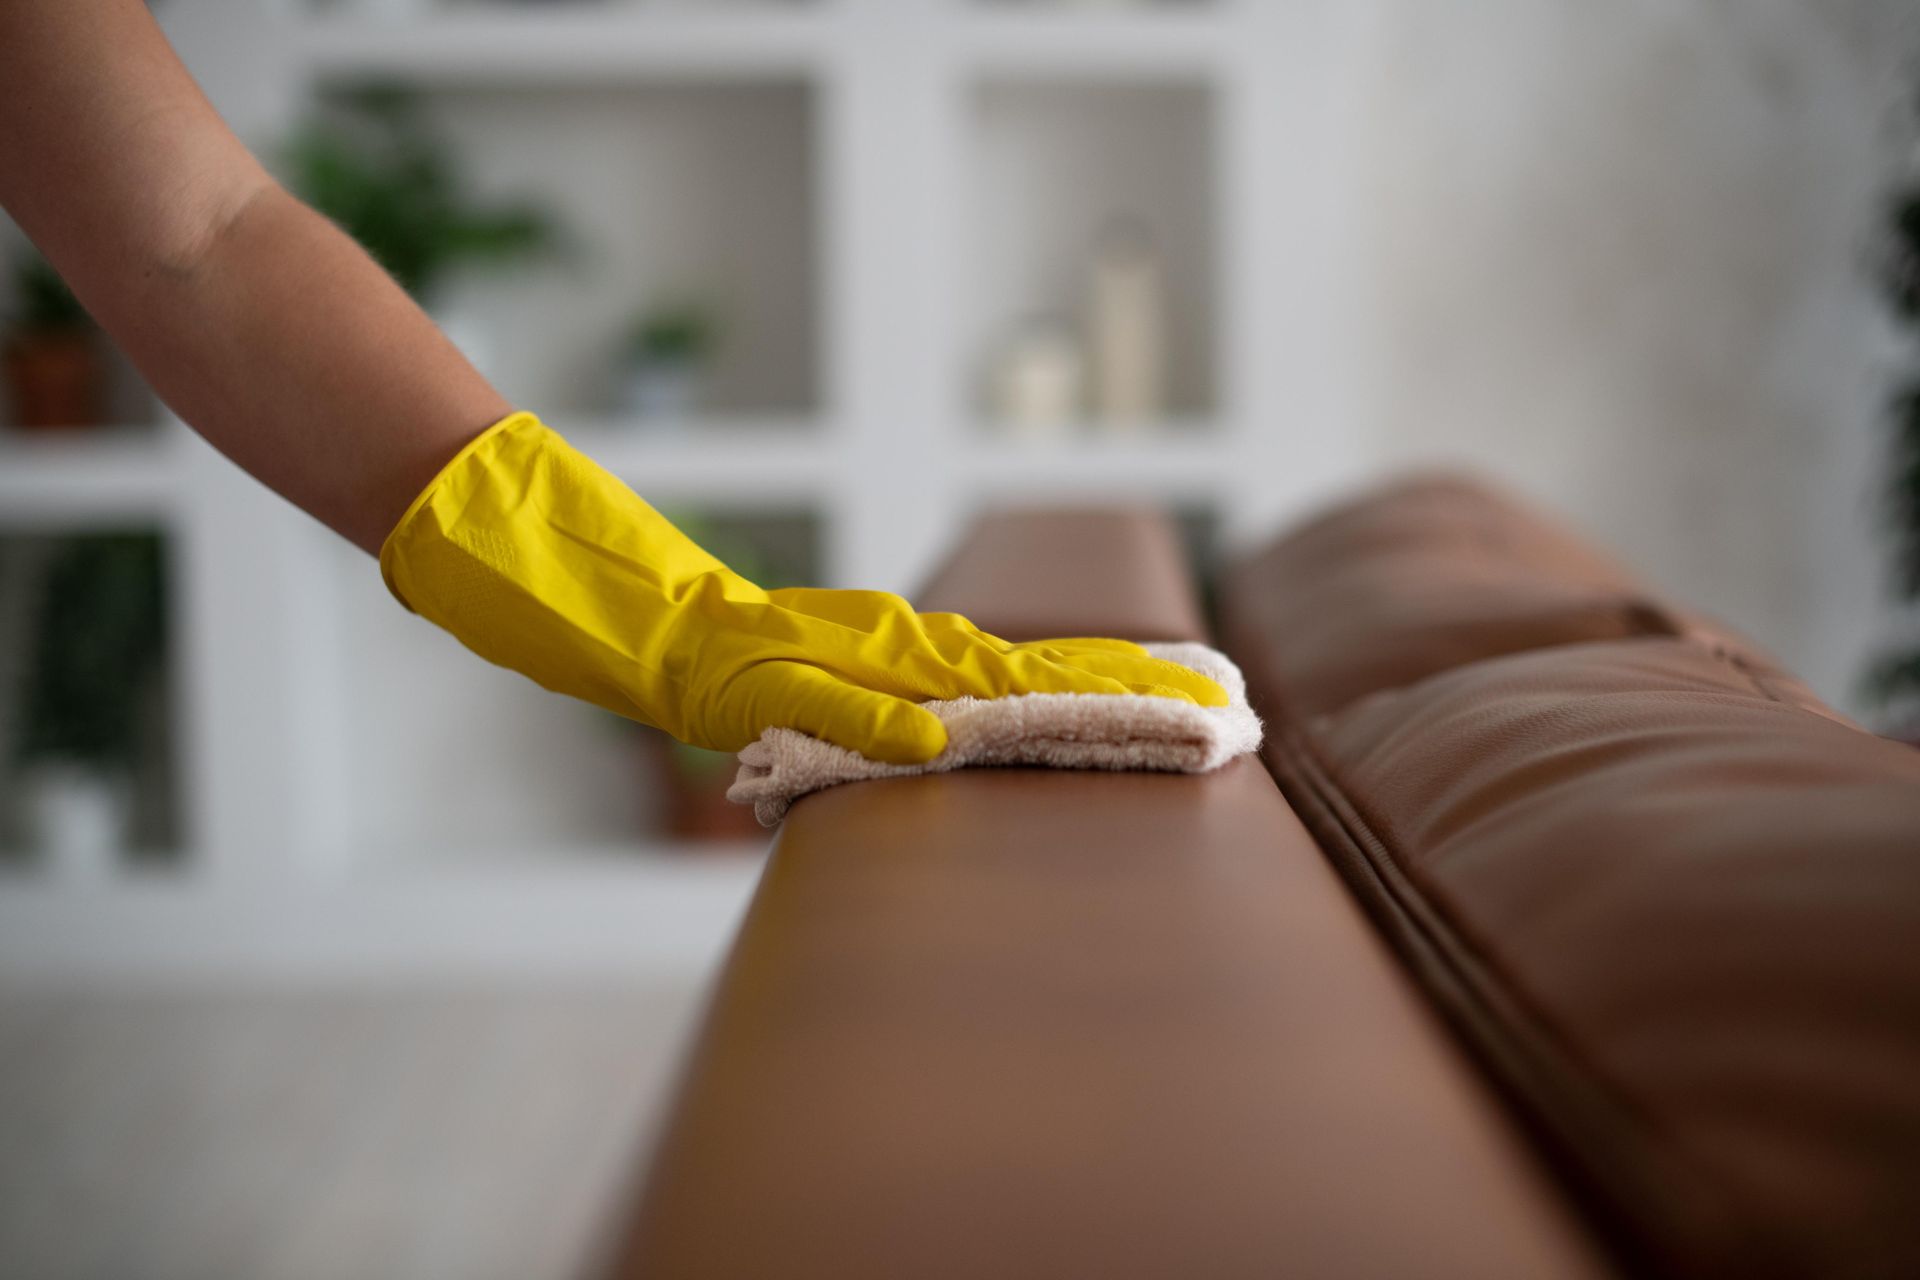 a person wearing a yellow glove is cleaning a brown leather couch